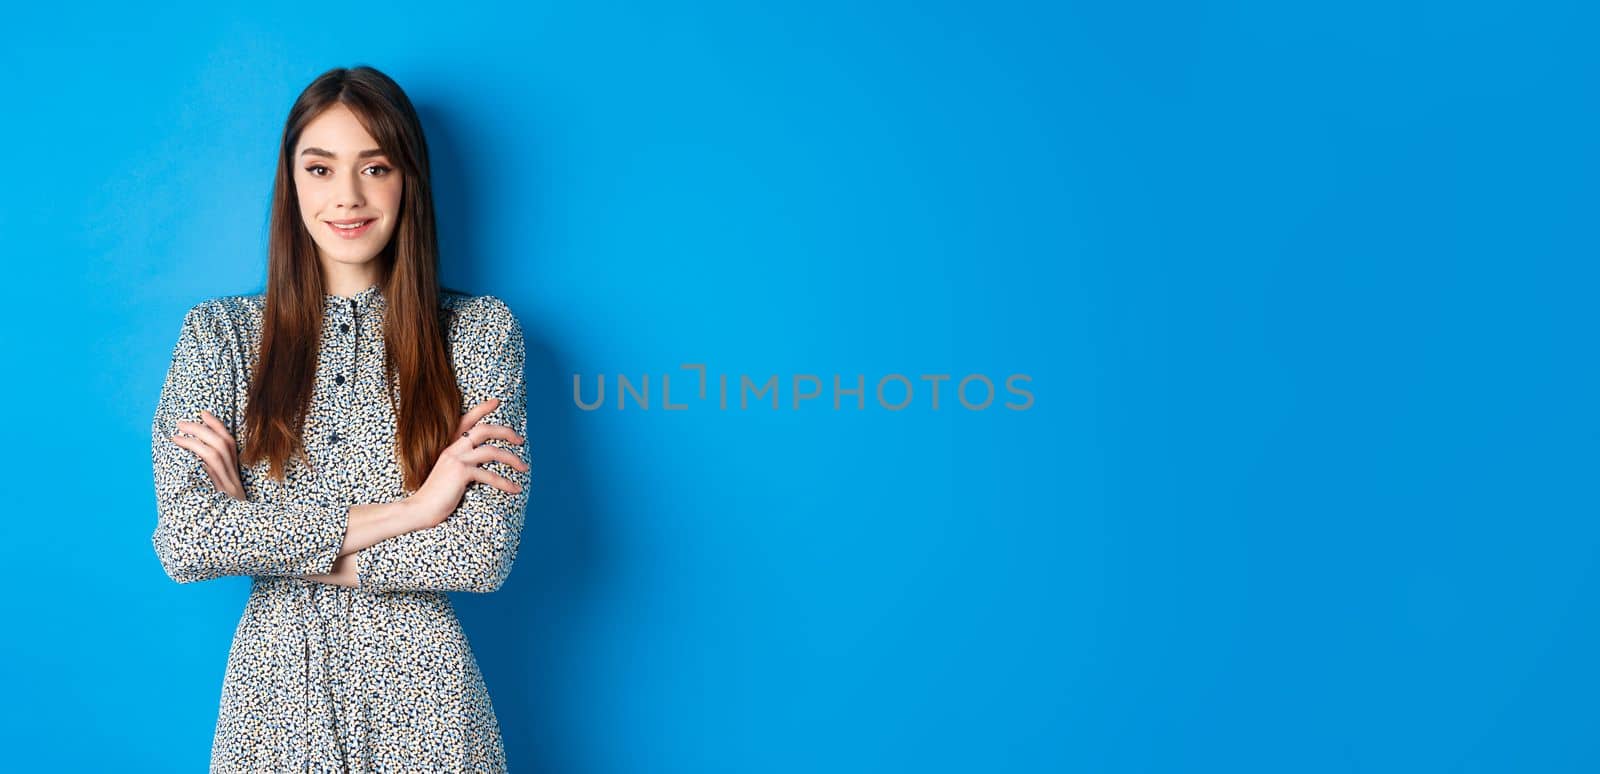 Elegant caucasian girl in dress cross arms on chest, standing on blue background.